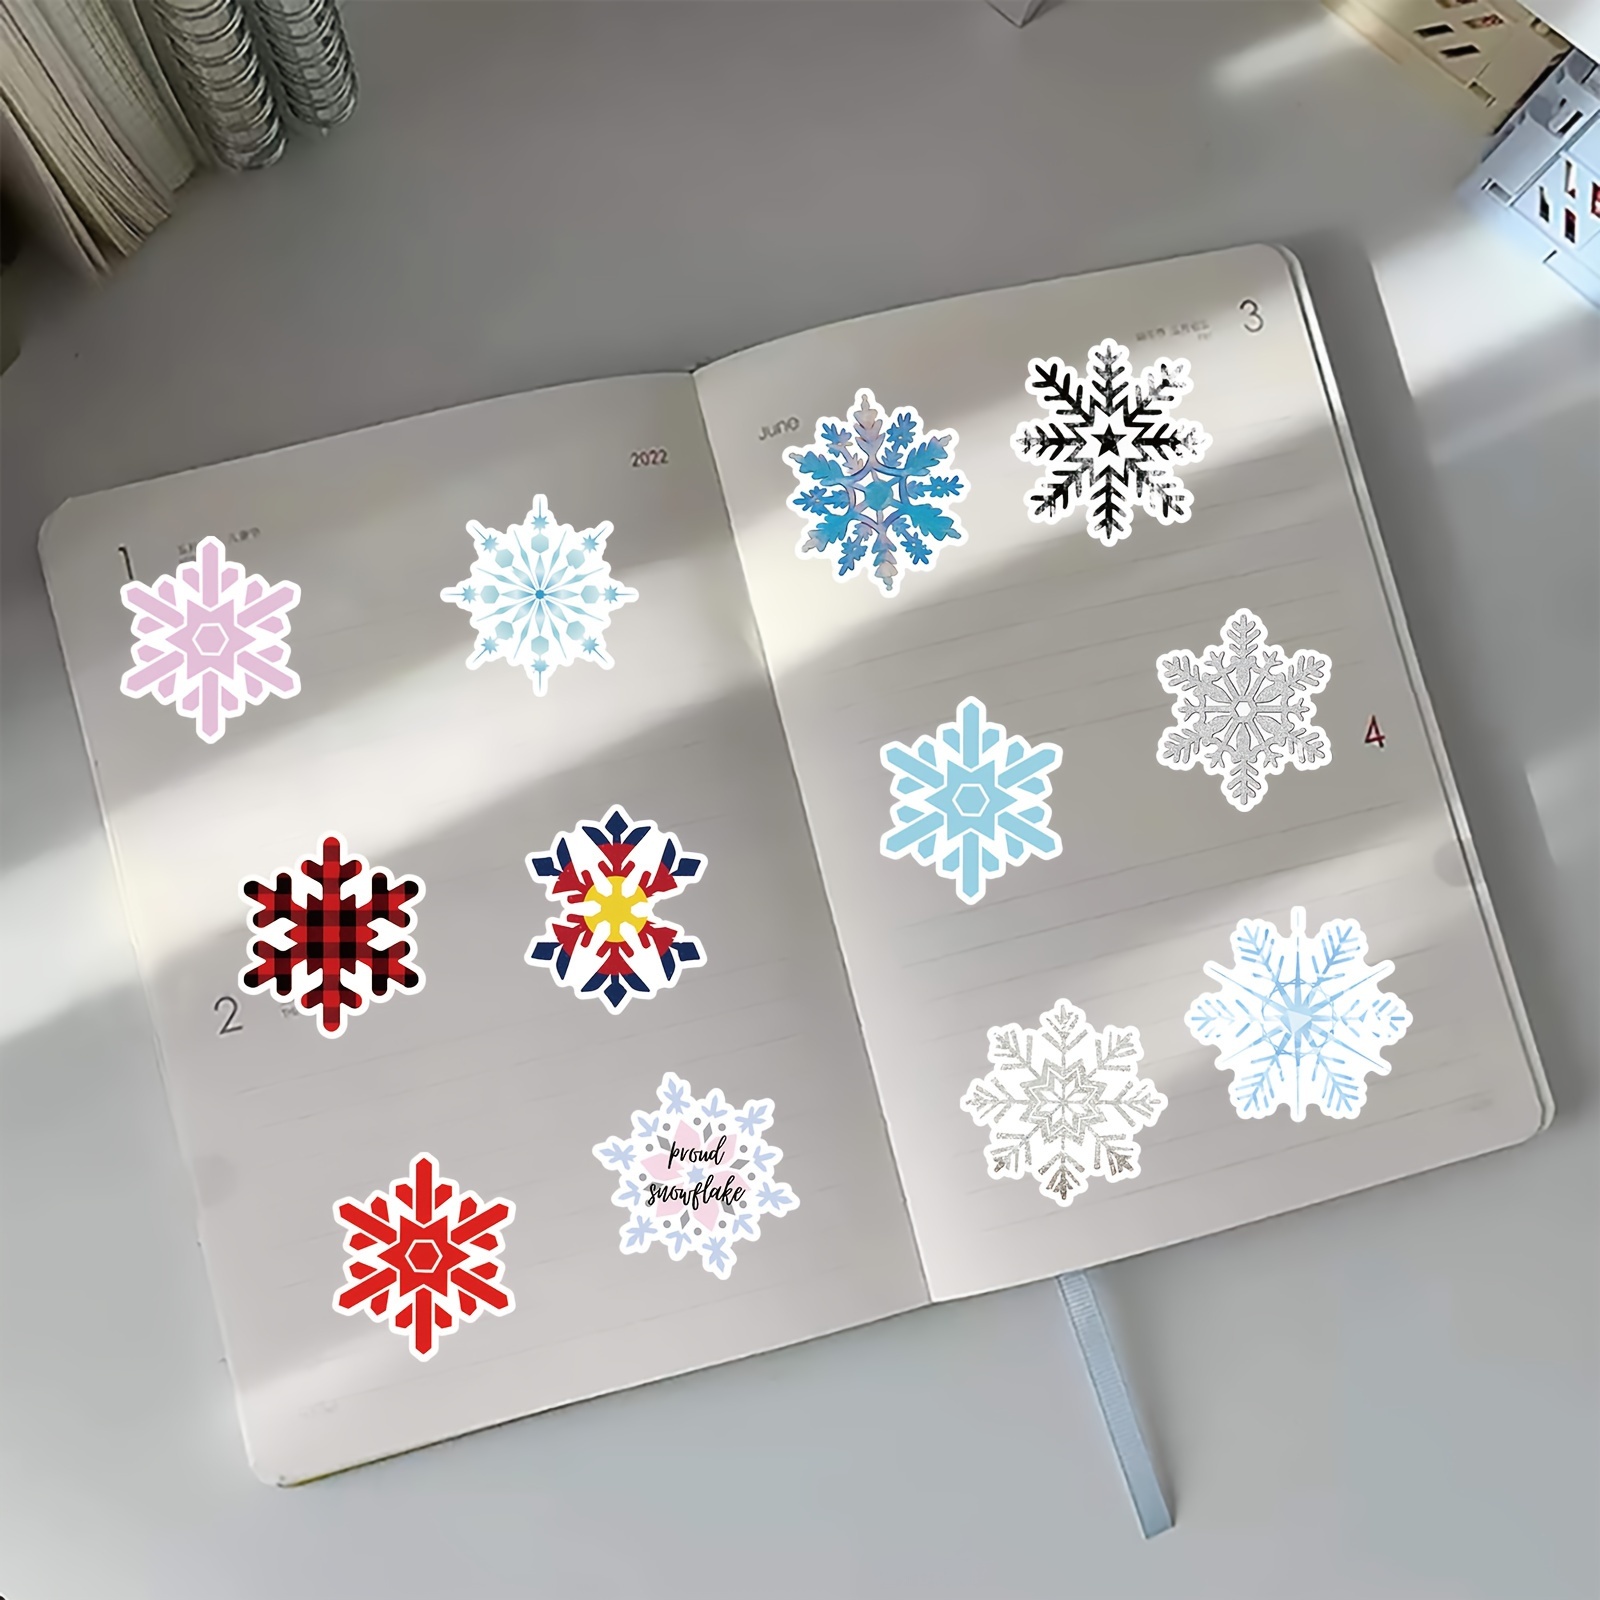 JULBEAR 300 Pieces Foam Stickers Bulk Mini Glitter Self-Adhesive Snowflake  Snow Stickers for Arts Crafts Greeting Cards Winter Christmas Decoration